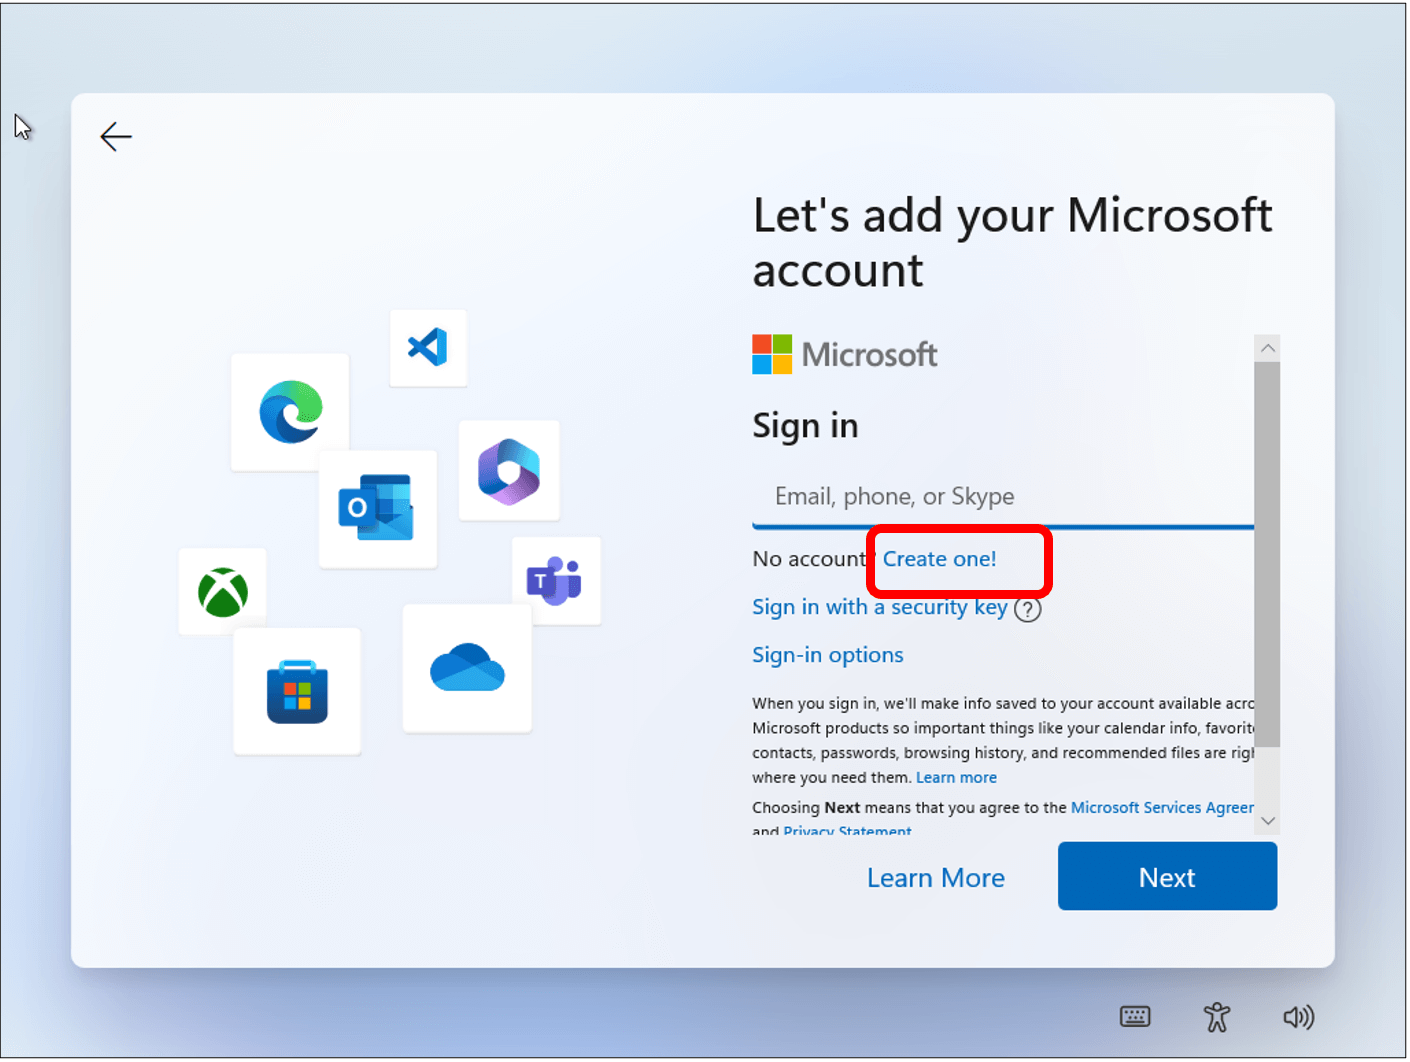 Microsoft account sign in screen with Create one! highlighted in red.